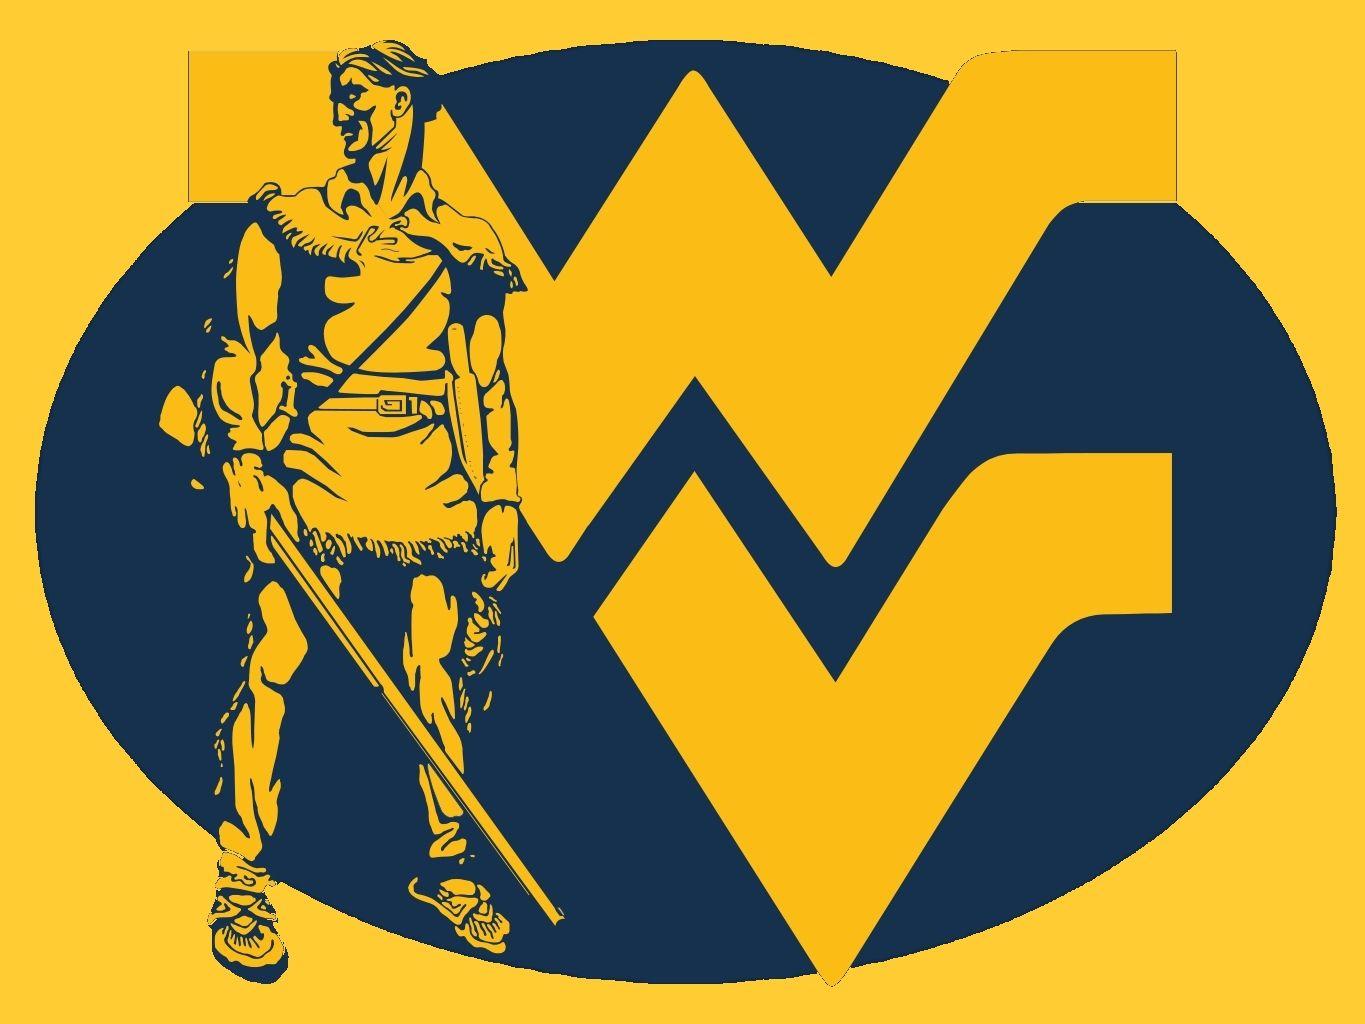 West Virginia Mountaineers Logo - West Virginia Mountaineers Archives - The Confluence at Jollybengali.net